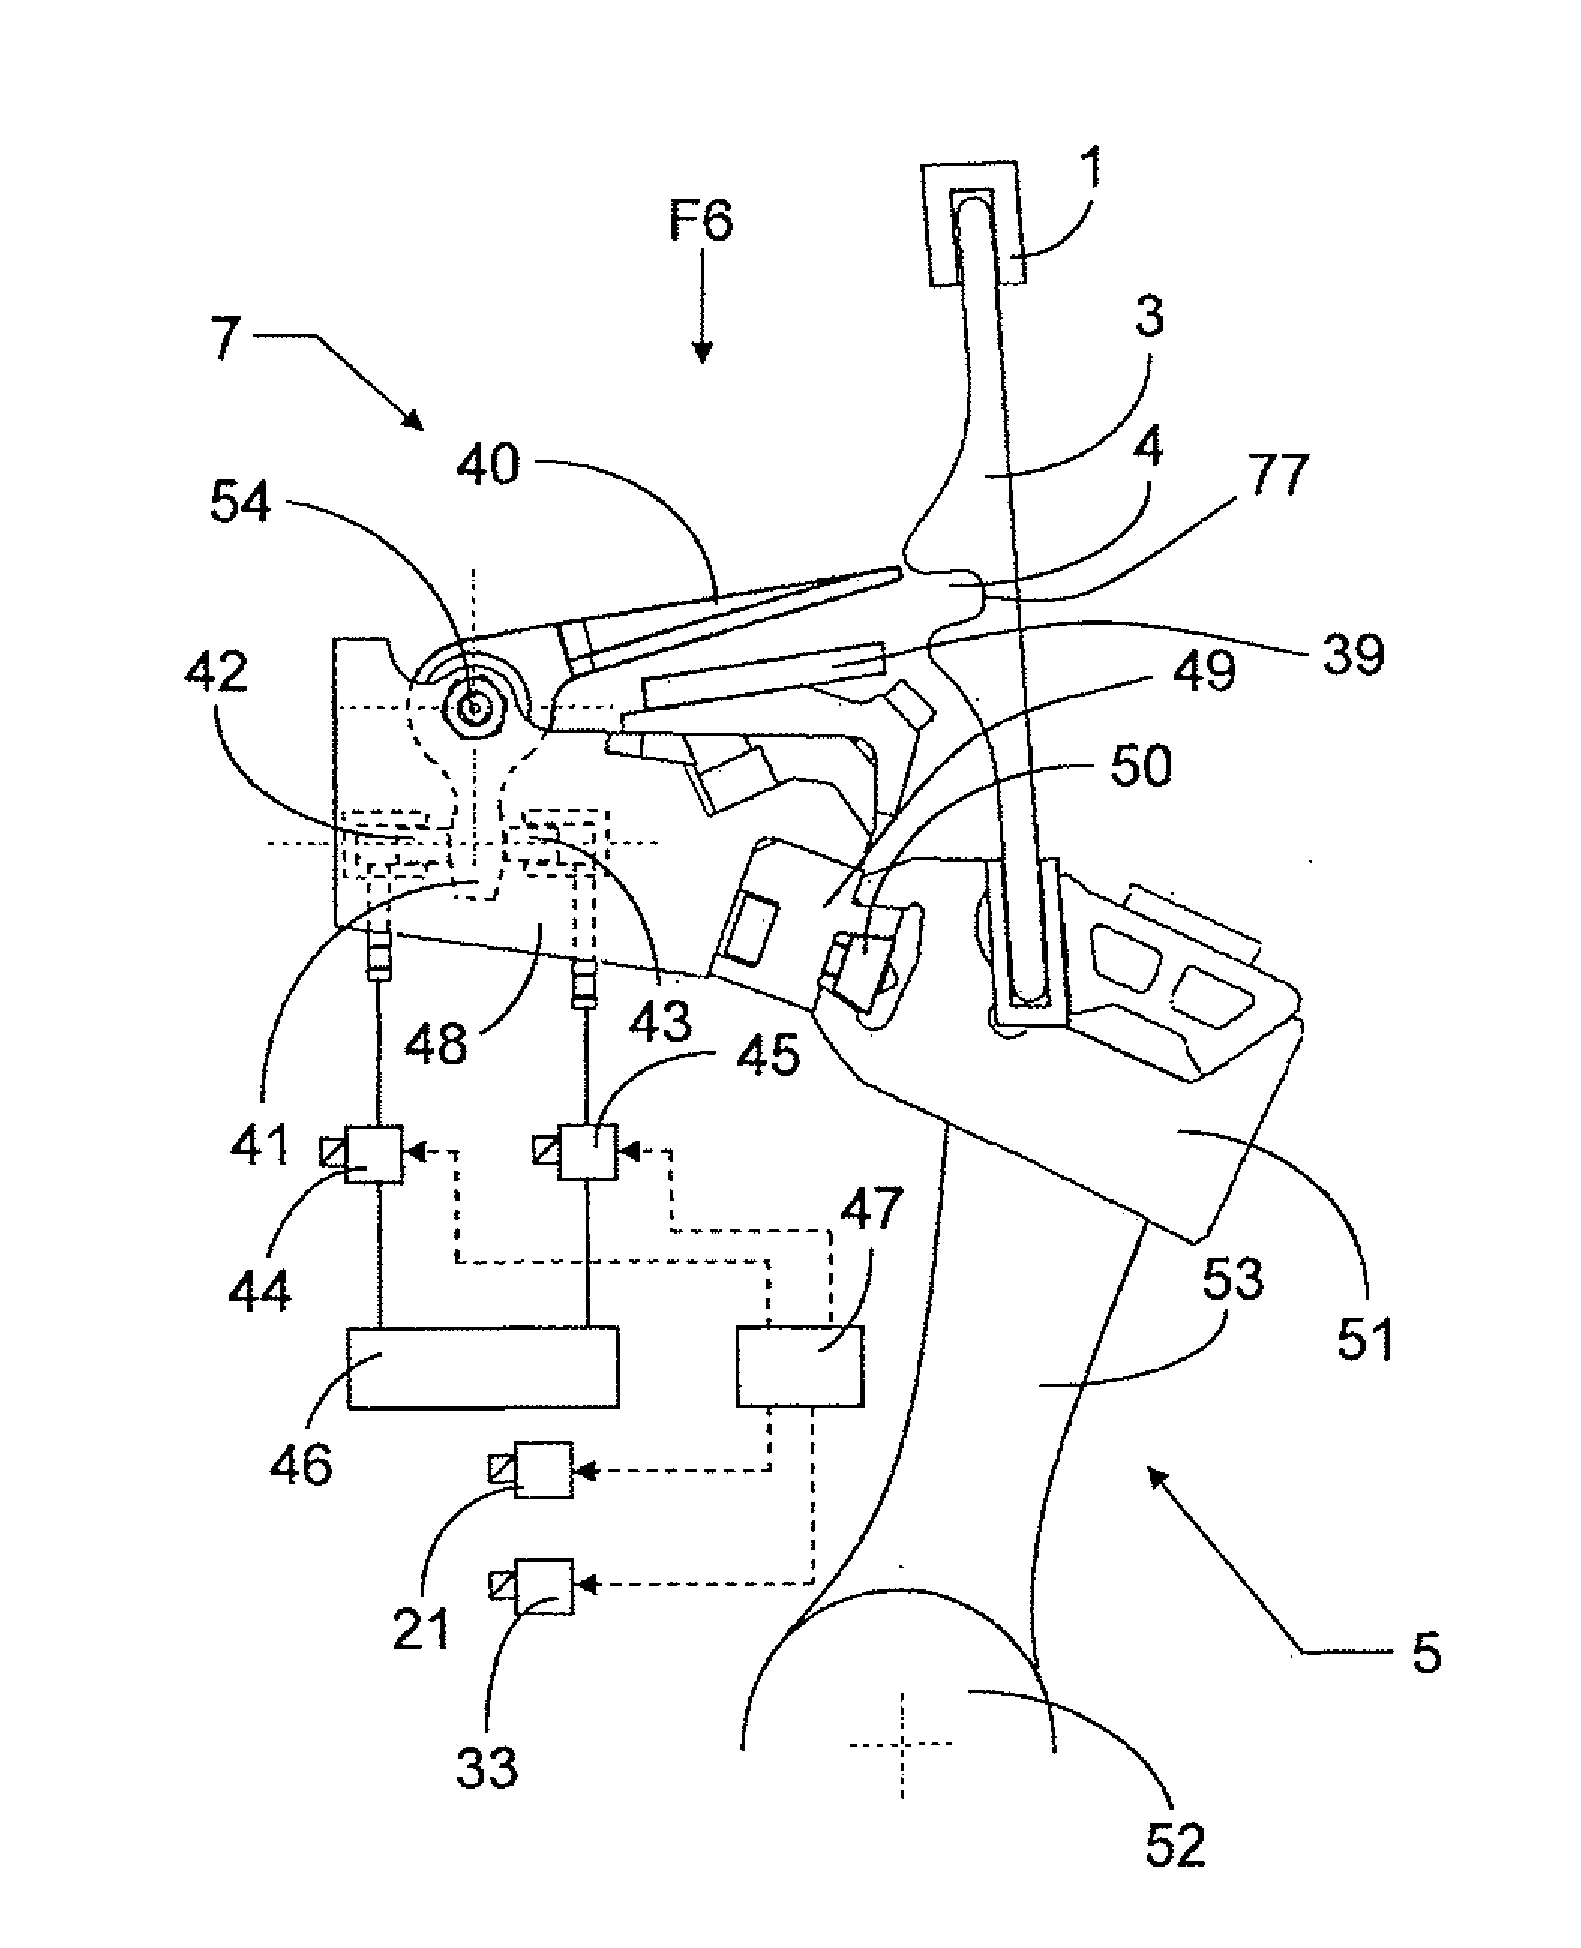 Device and method for catching and stretching weft threads in weaving machine